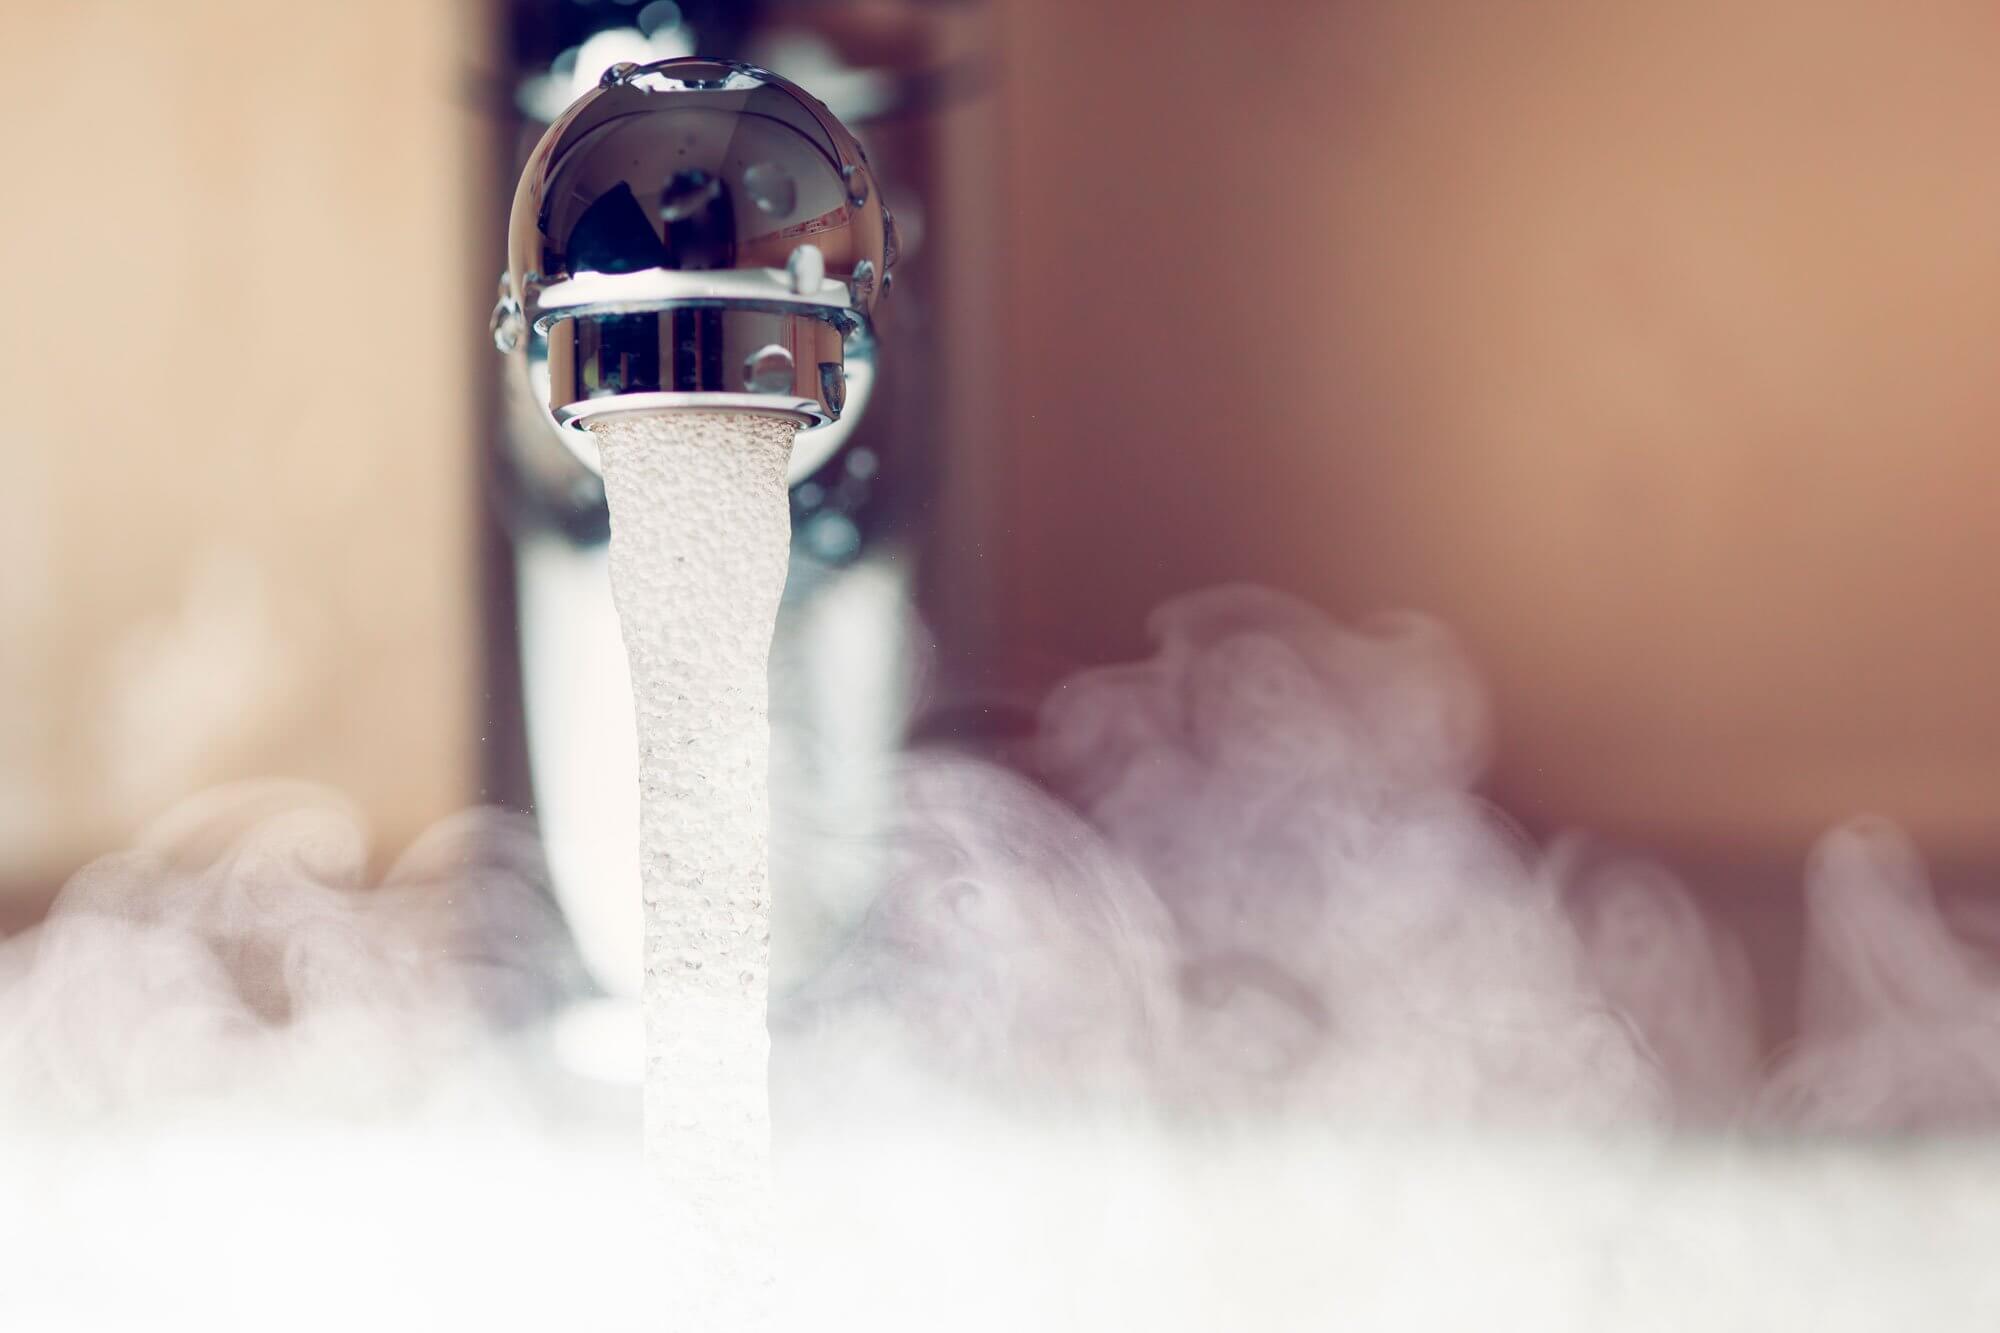 How to protect your business from getting into hot water